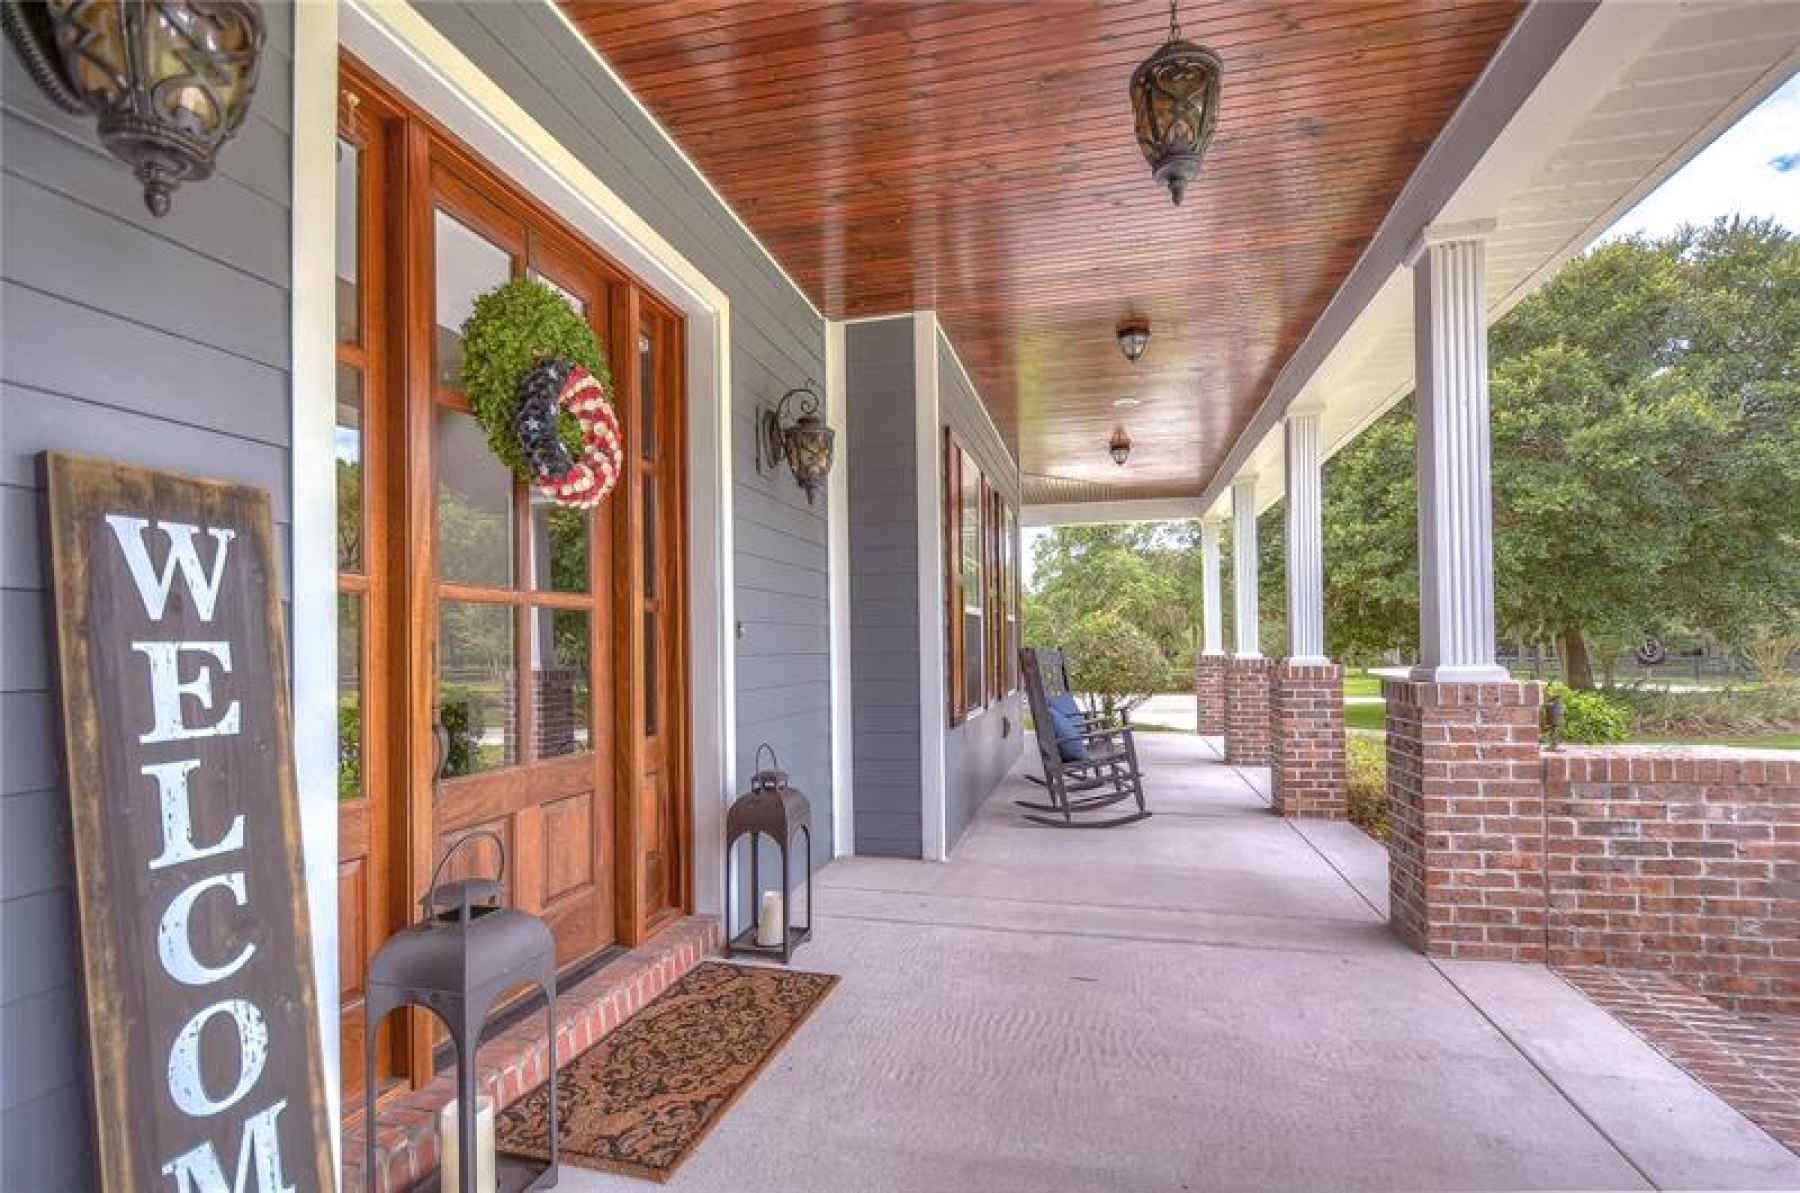 Charming front porch!